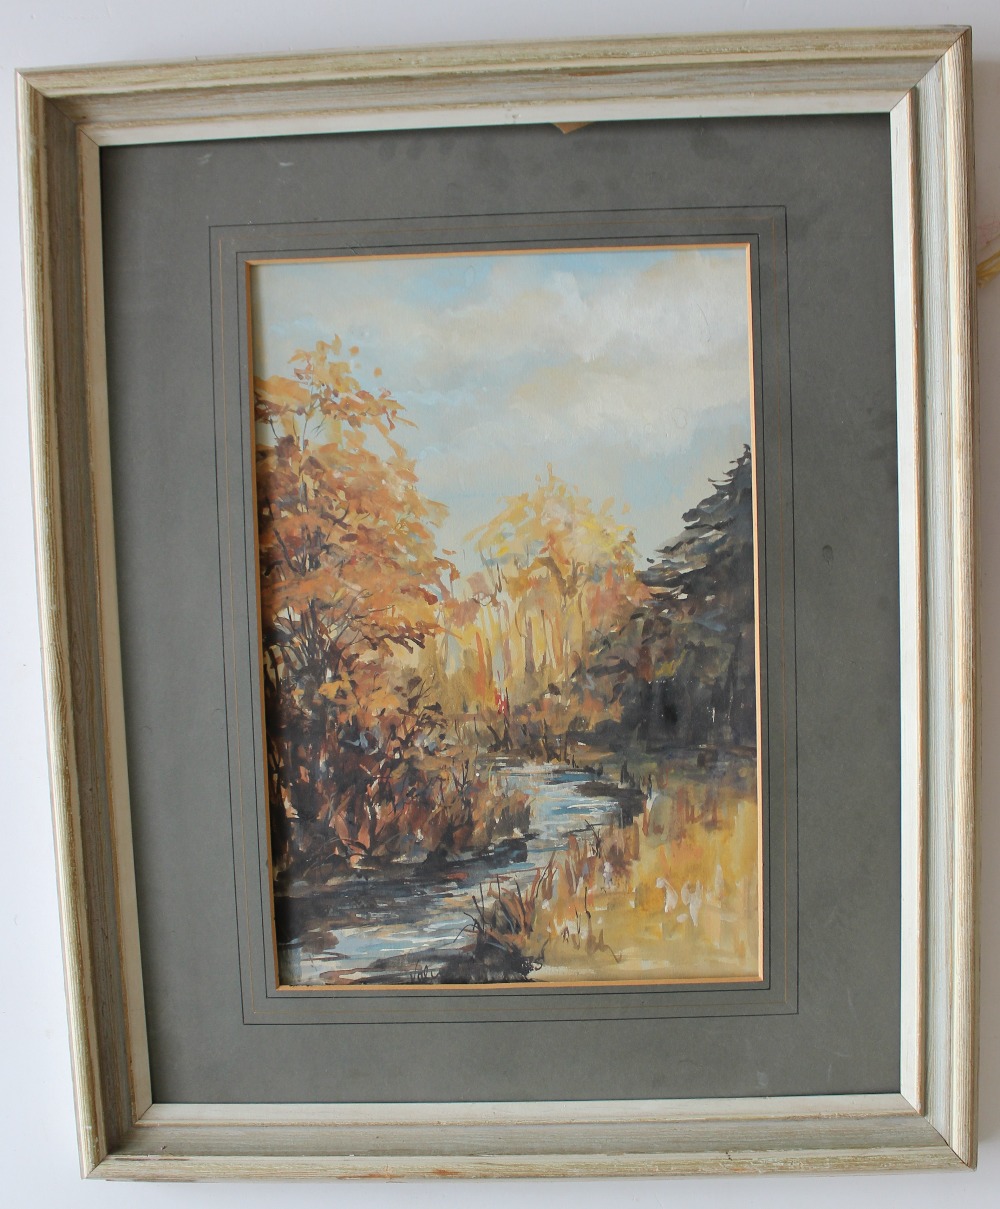 Valerie Ganz
A stream through a valley
Watercolour
Signed
36.5 x 24. - Image 2 of 3